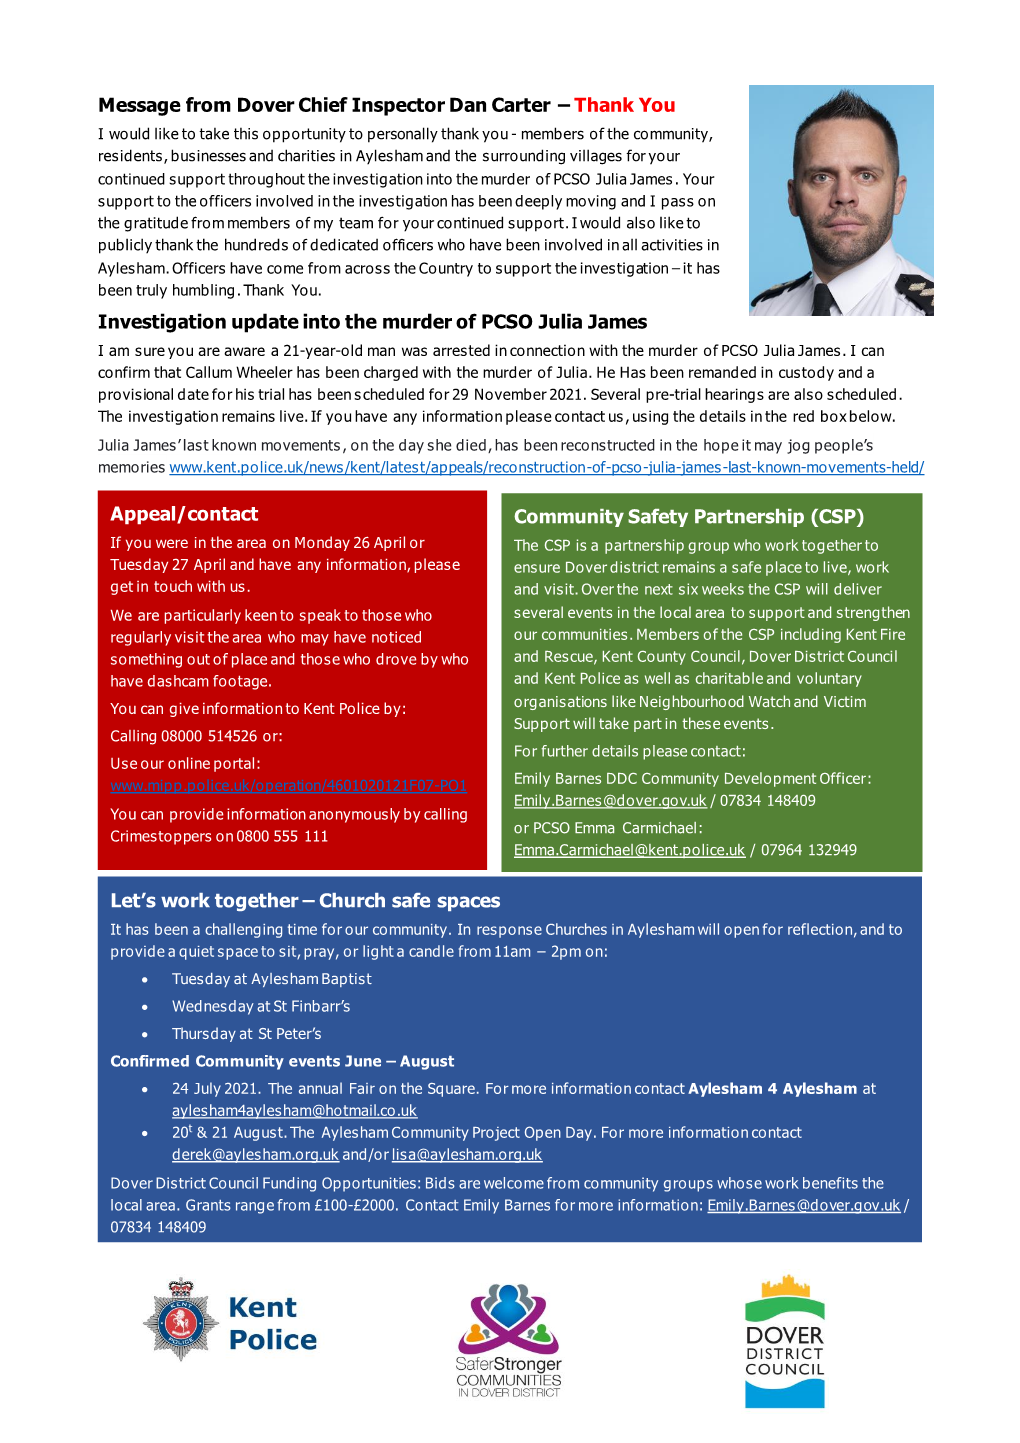 Community Message from Chief Inspector Dan Carter, Kent Police